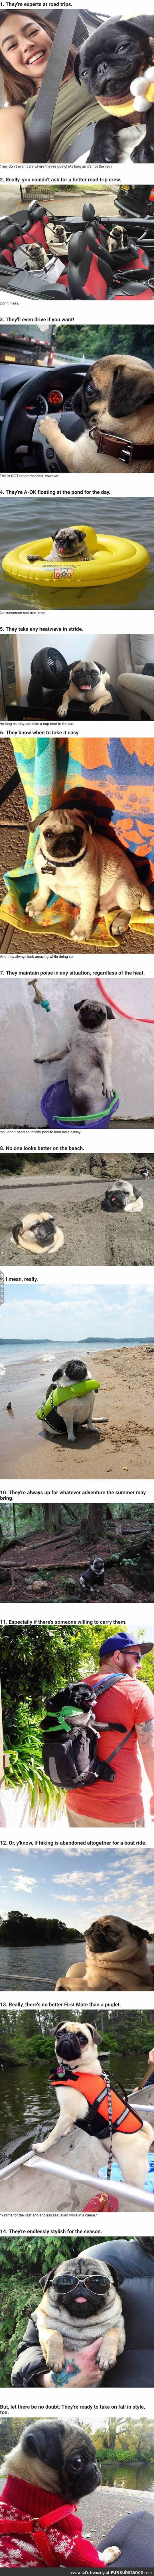 14 reasons pugs are the ultimate experts in summer living